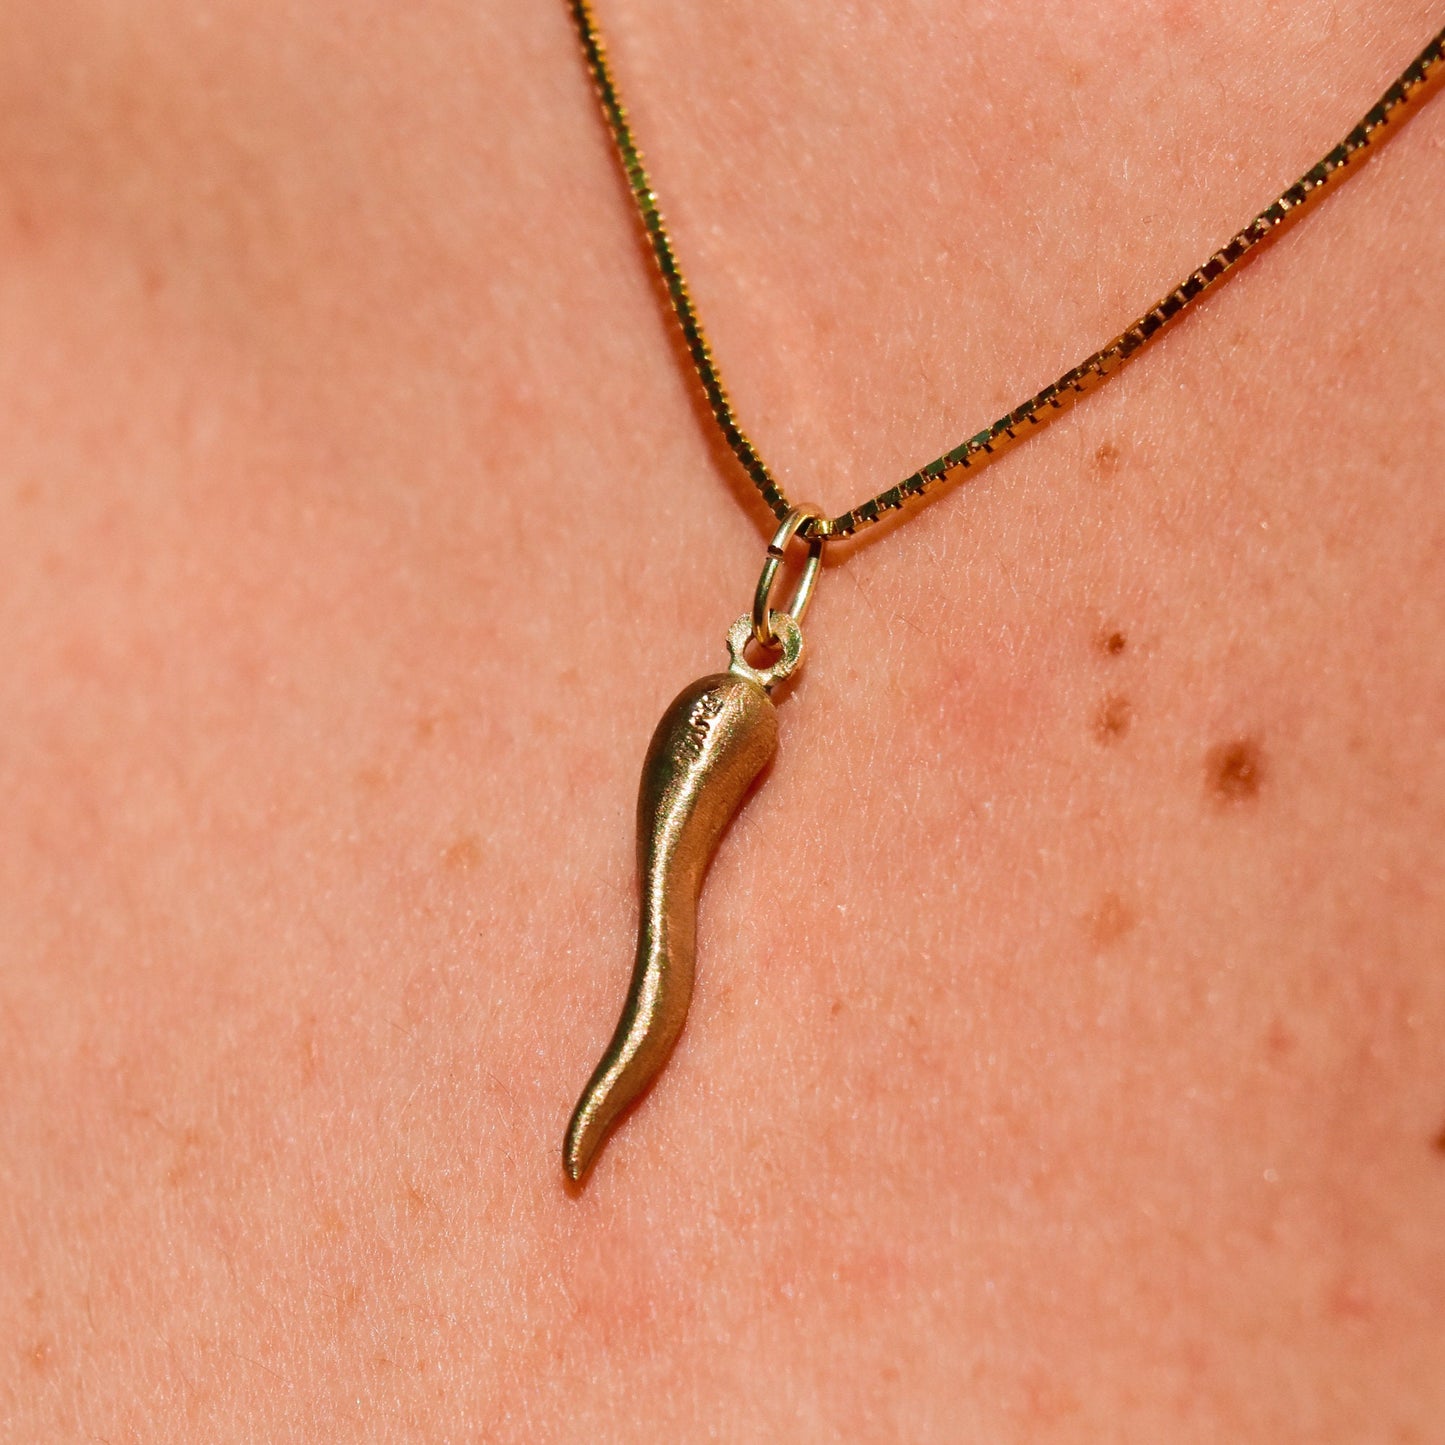 14K yellow gold Italian horn pendant necklace on skin, small brushed gold cornicello charm for good luck